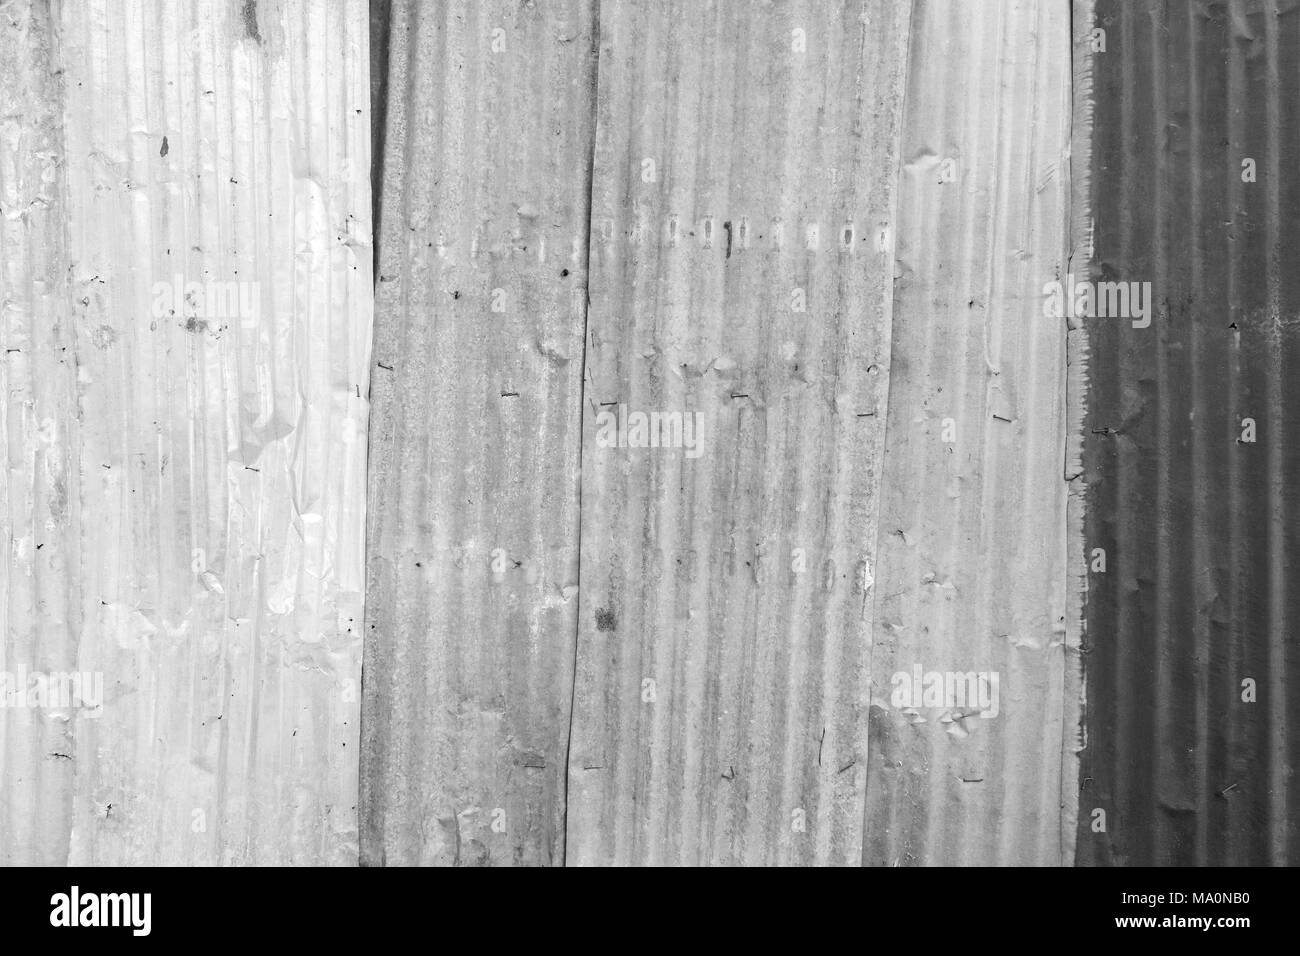 Rusty and corrugated iron metal construction site wall texture background in black and white. Stock Photo